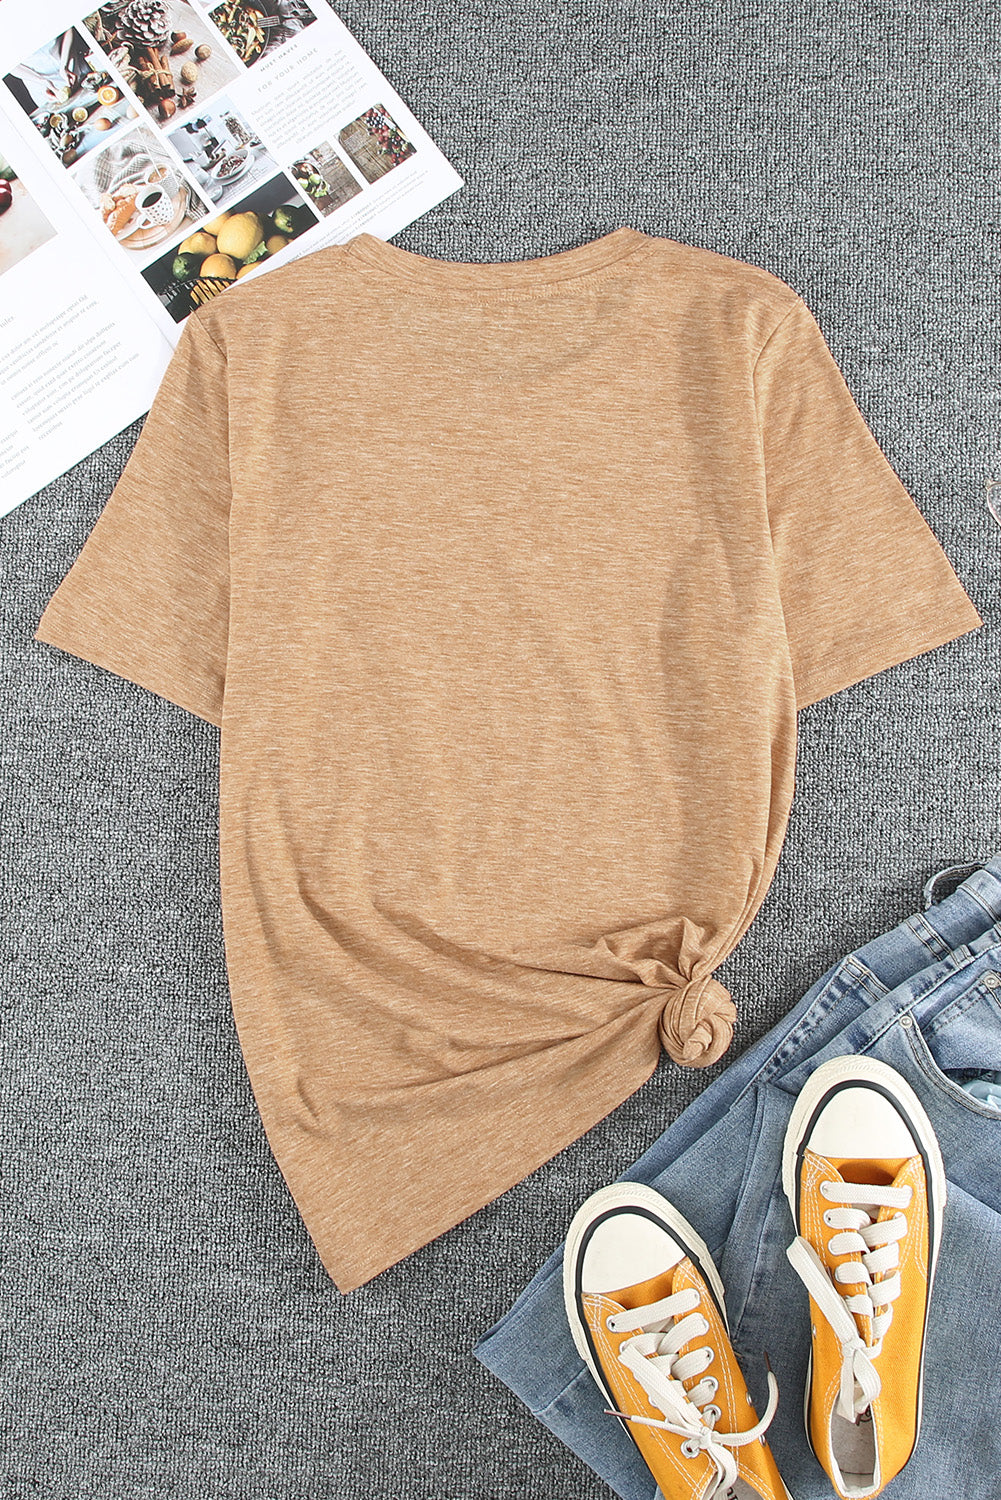 SUNNY DAYS AHEAD Tee Shirt - The Lakeside Boutique